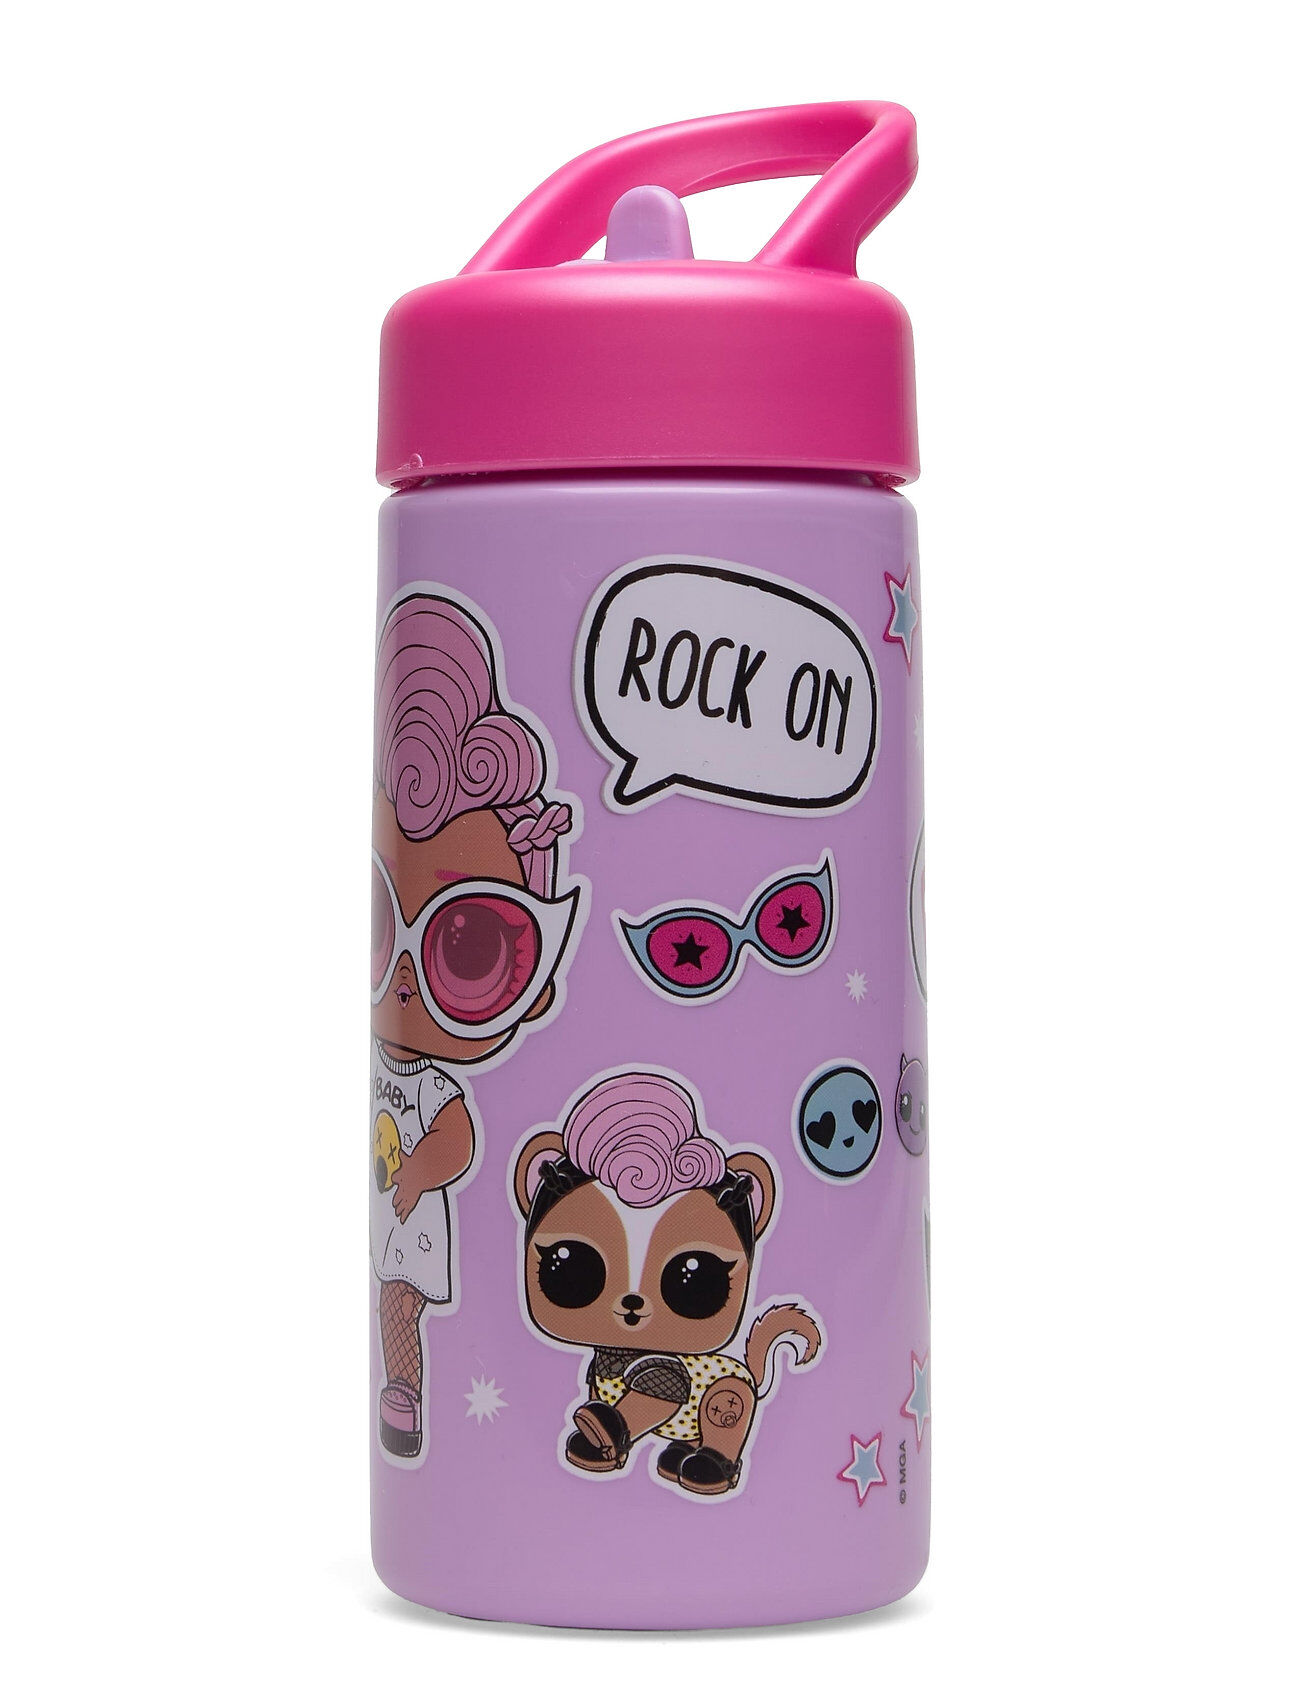 Euromic Lol Surprise! Sipper Water Bottle Home Meal Time Water Bottles Rosa Euromic